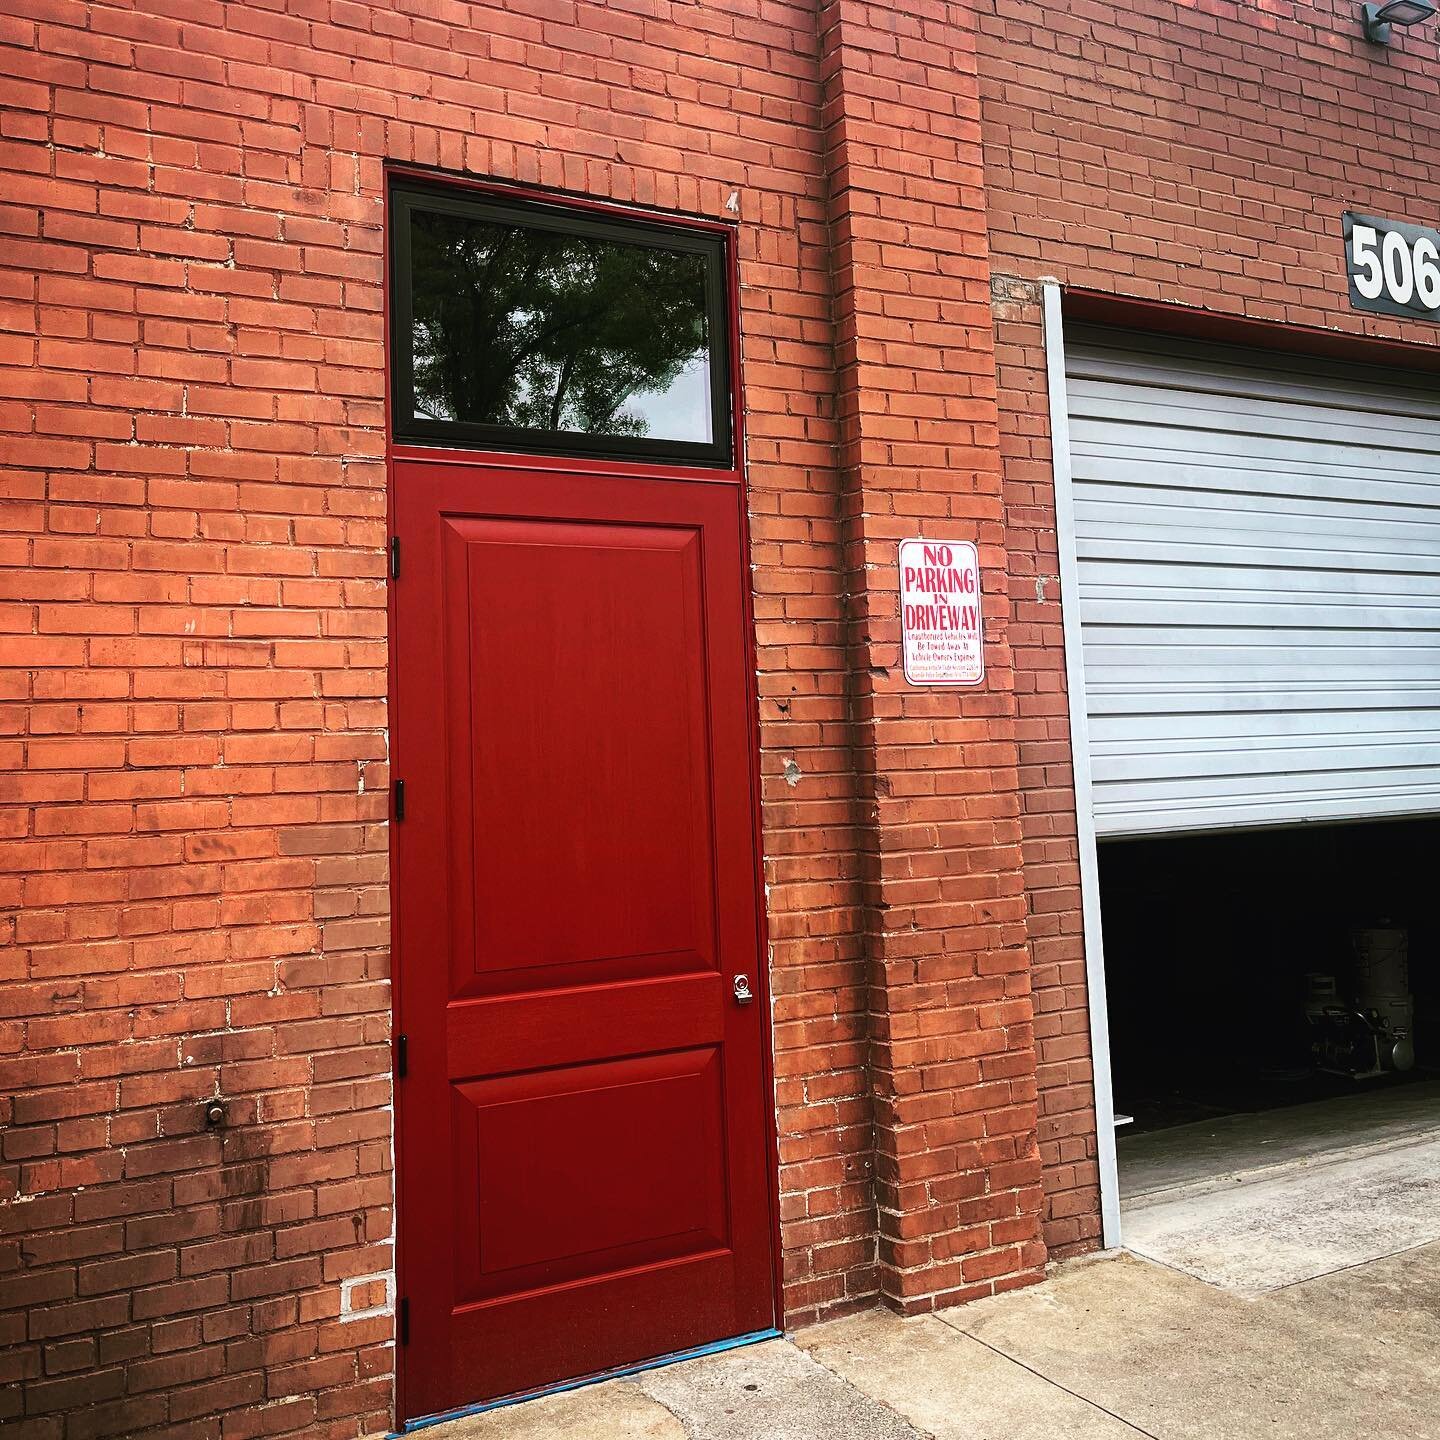 It&rsquo;s a Red Door🚪

An sneak peak of where we are in Building what turns out to be a Chocolate Factory.

It&rsquo;s been a long year of multiple learning experiences and figuring out how to keep moving forward; I must admit it, it&rsquo;s hard t